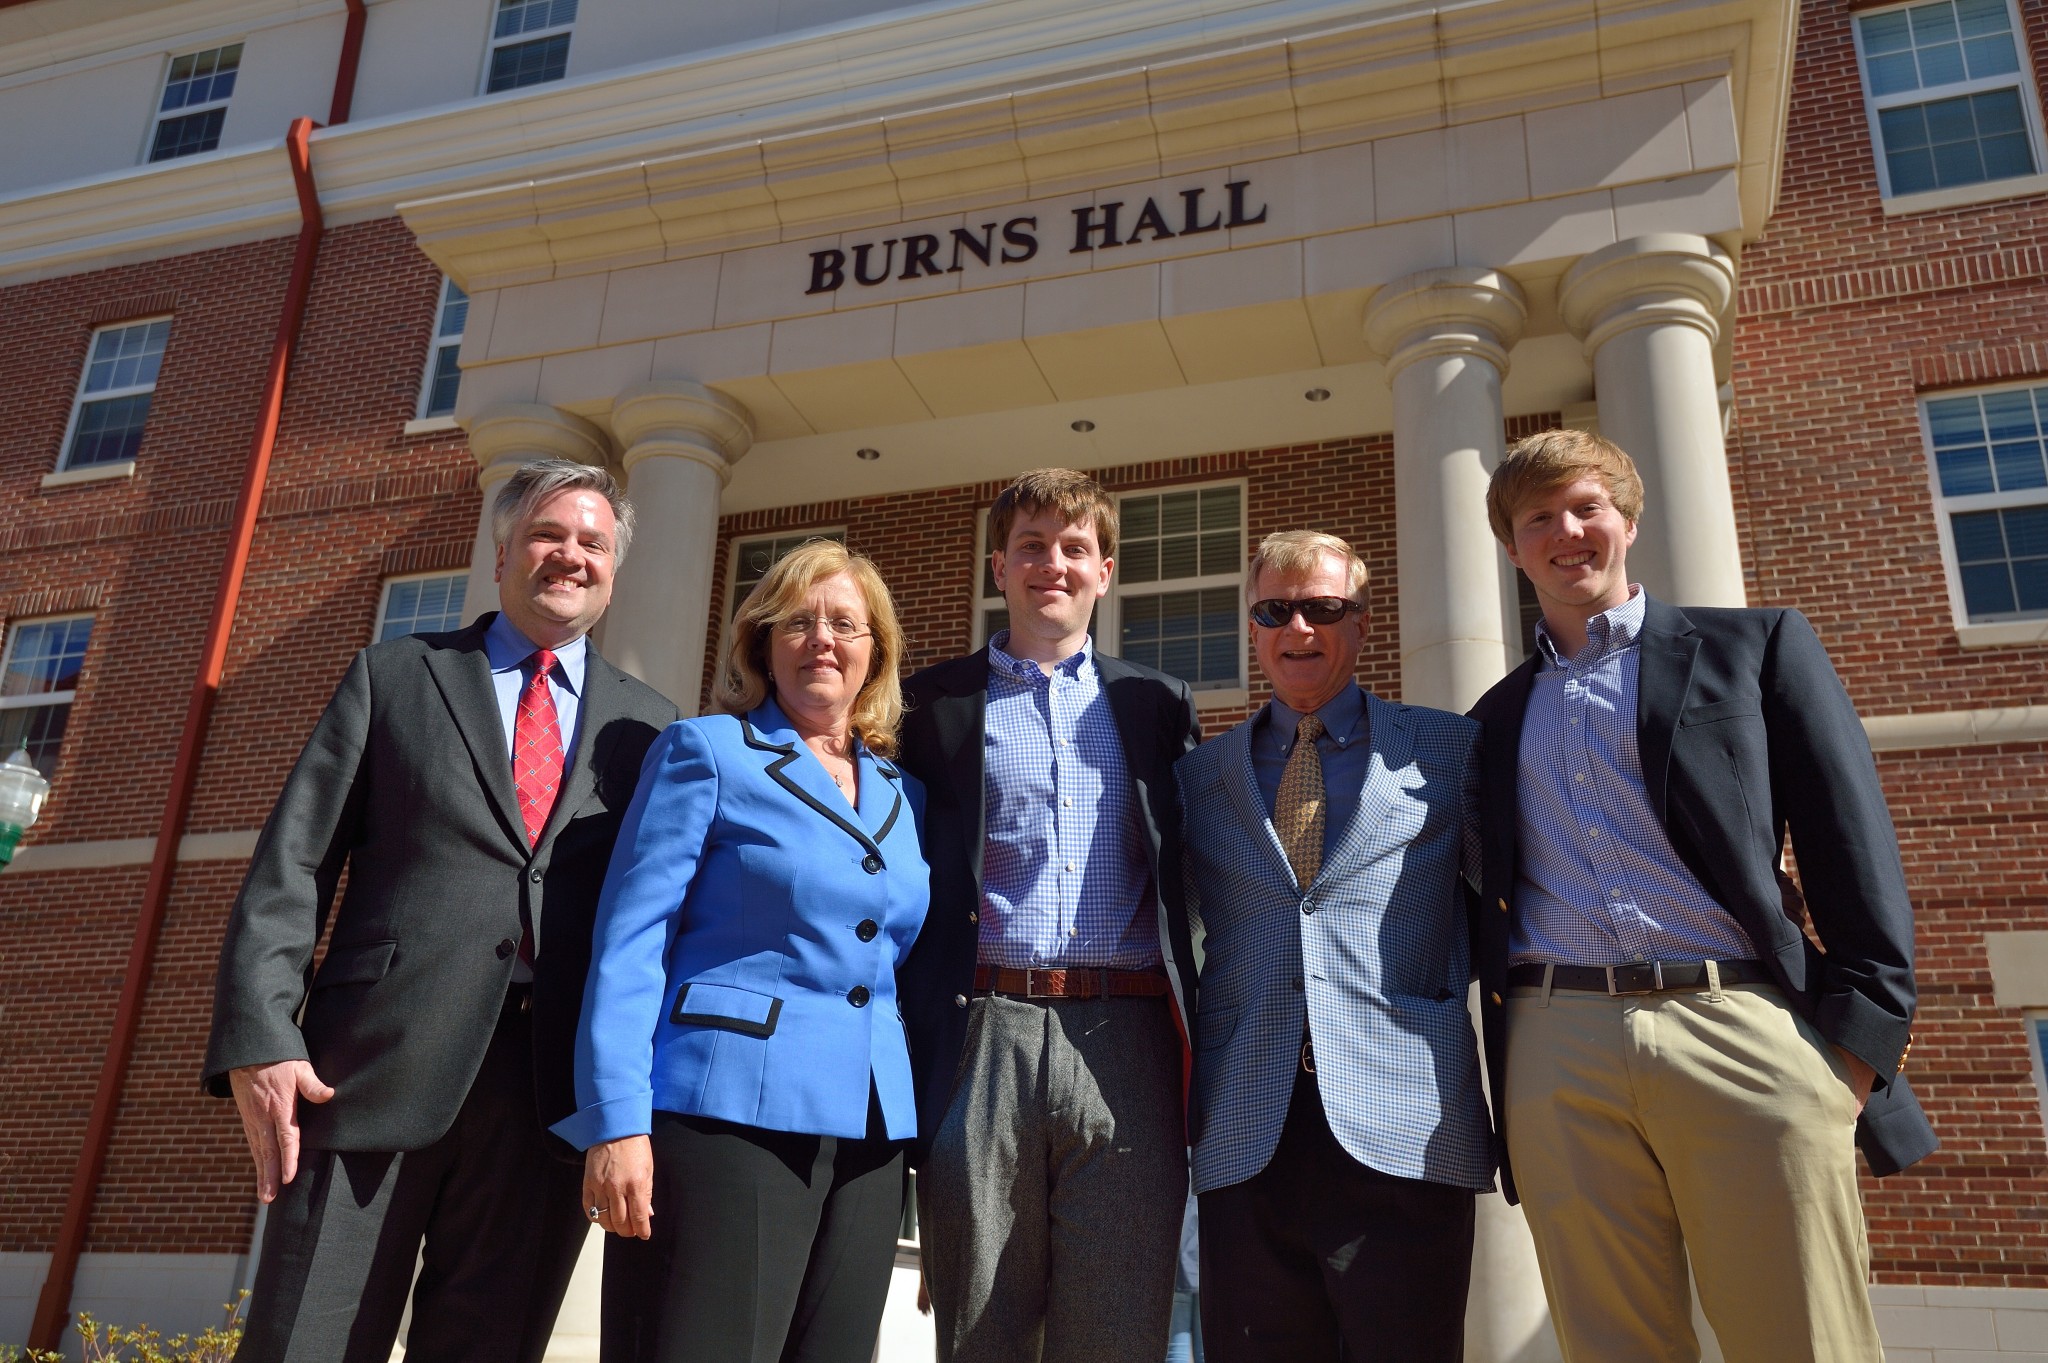 Roland Burns with wife, Sheryl, son Derek, Ole Miss Accountancy Professor Jimmy Davis and son Tyler stand in front of the newly dedicated Burns Hall. Roland and Derek shared Davis as a professor while at Ole Miss, and youngest son, Tyler will be taking a class Davis is teaching this fall. 